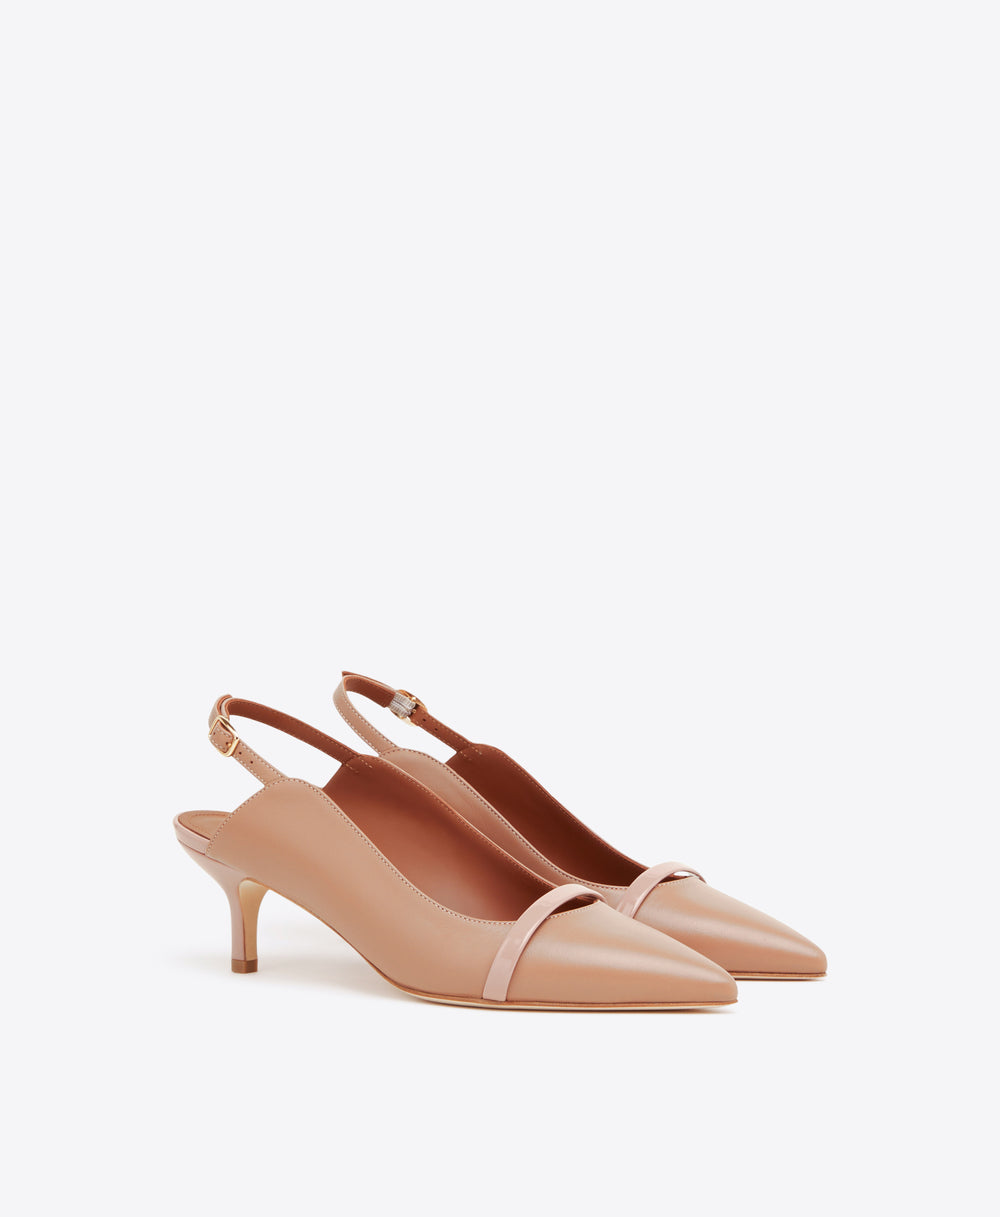 Women's Nude Patent And Blush Pink Leather Pointed Toe Pumps with Kitten Heel Malone Souliers